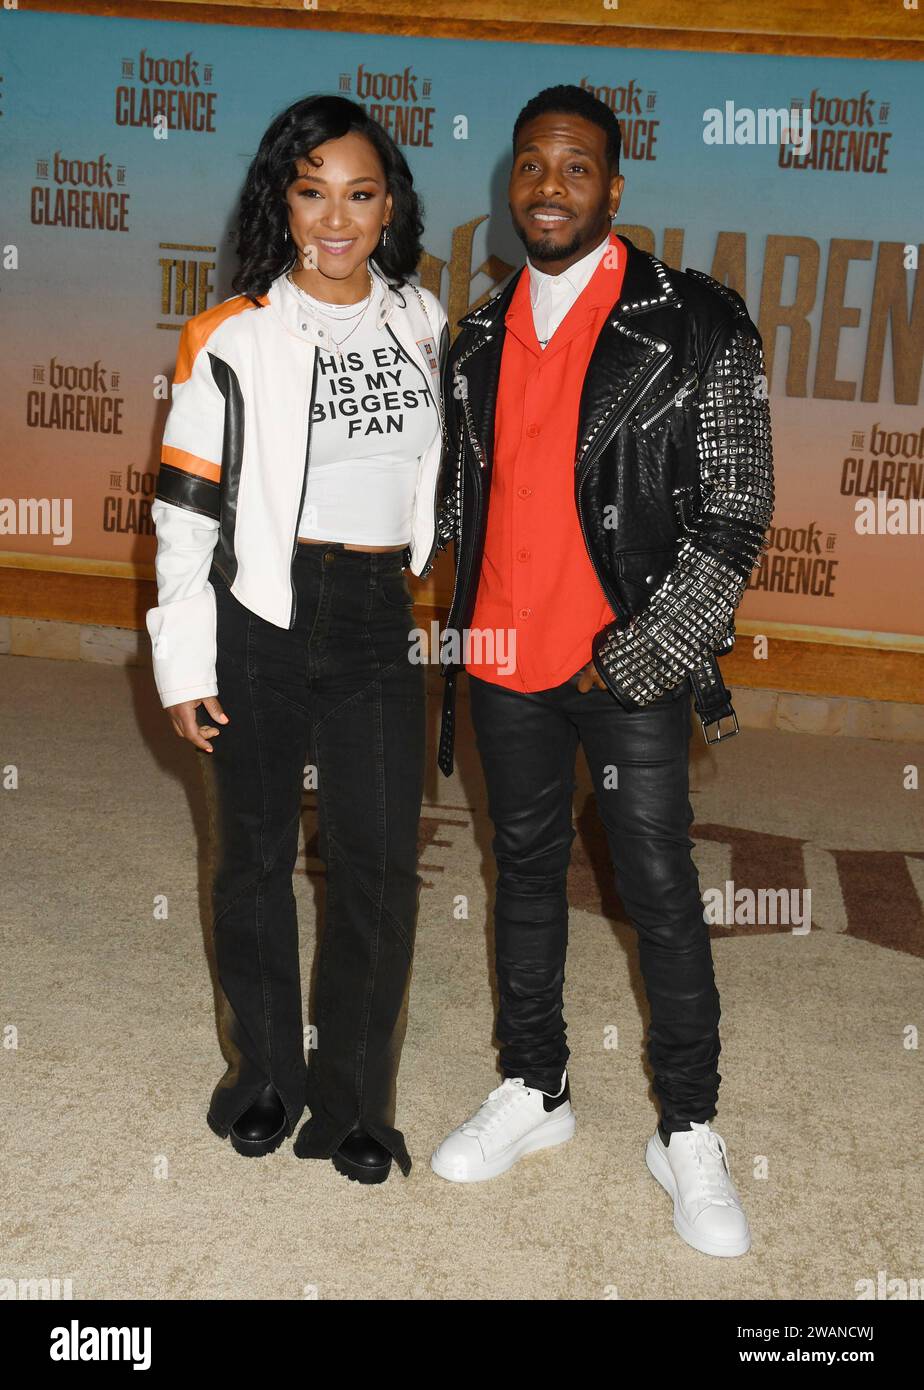 LOS ANGELES, CA - JANUARY 5: Kel Mitchell and wife Asia Lee at The Book of Clarence LA Premiere on January 5, 2024 at The Academy Museum of Motion Pictures in Los Angeles, California. Copyright: xJeffreyxMayerx Stock Photo